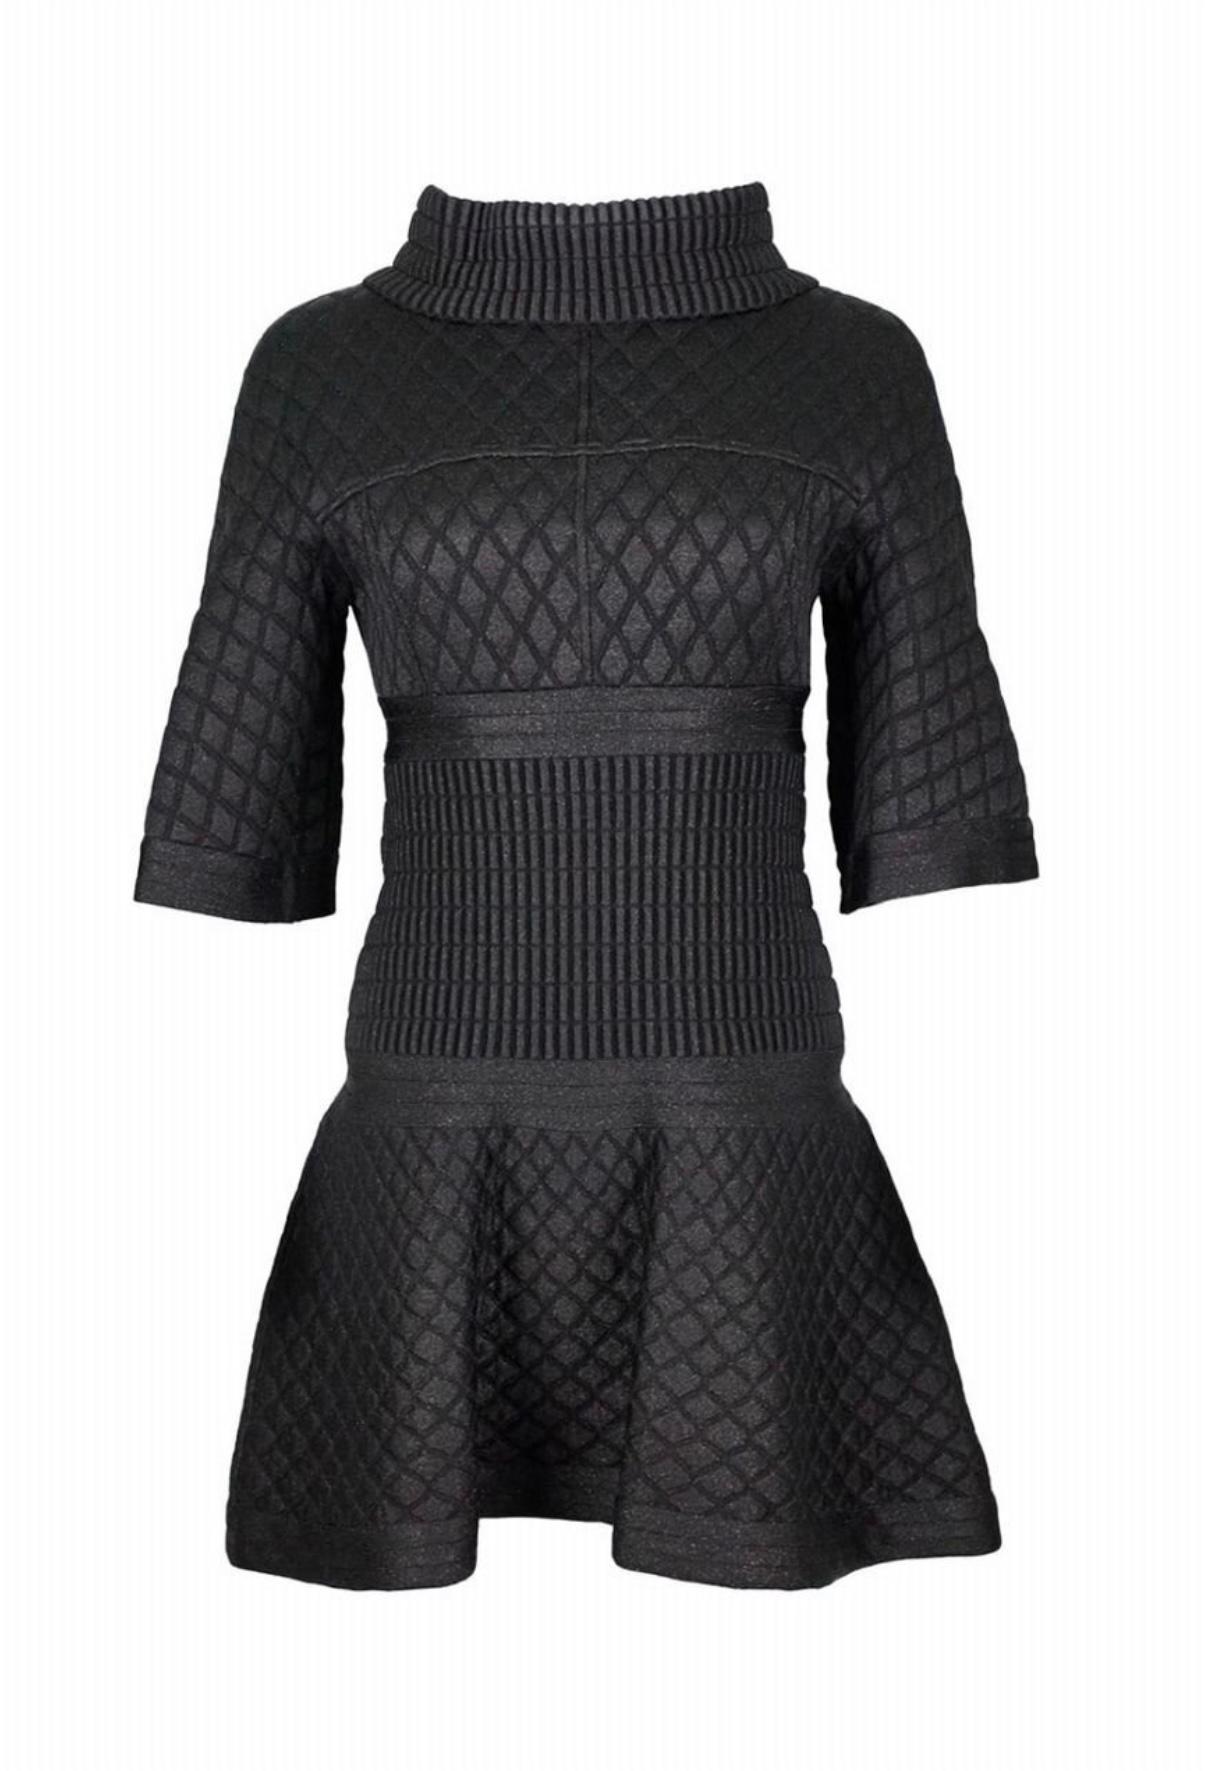 Chanel Black Quilted Shimmering Dress In Excellent Condition For Sale In Dubai, AE